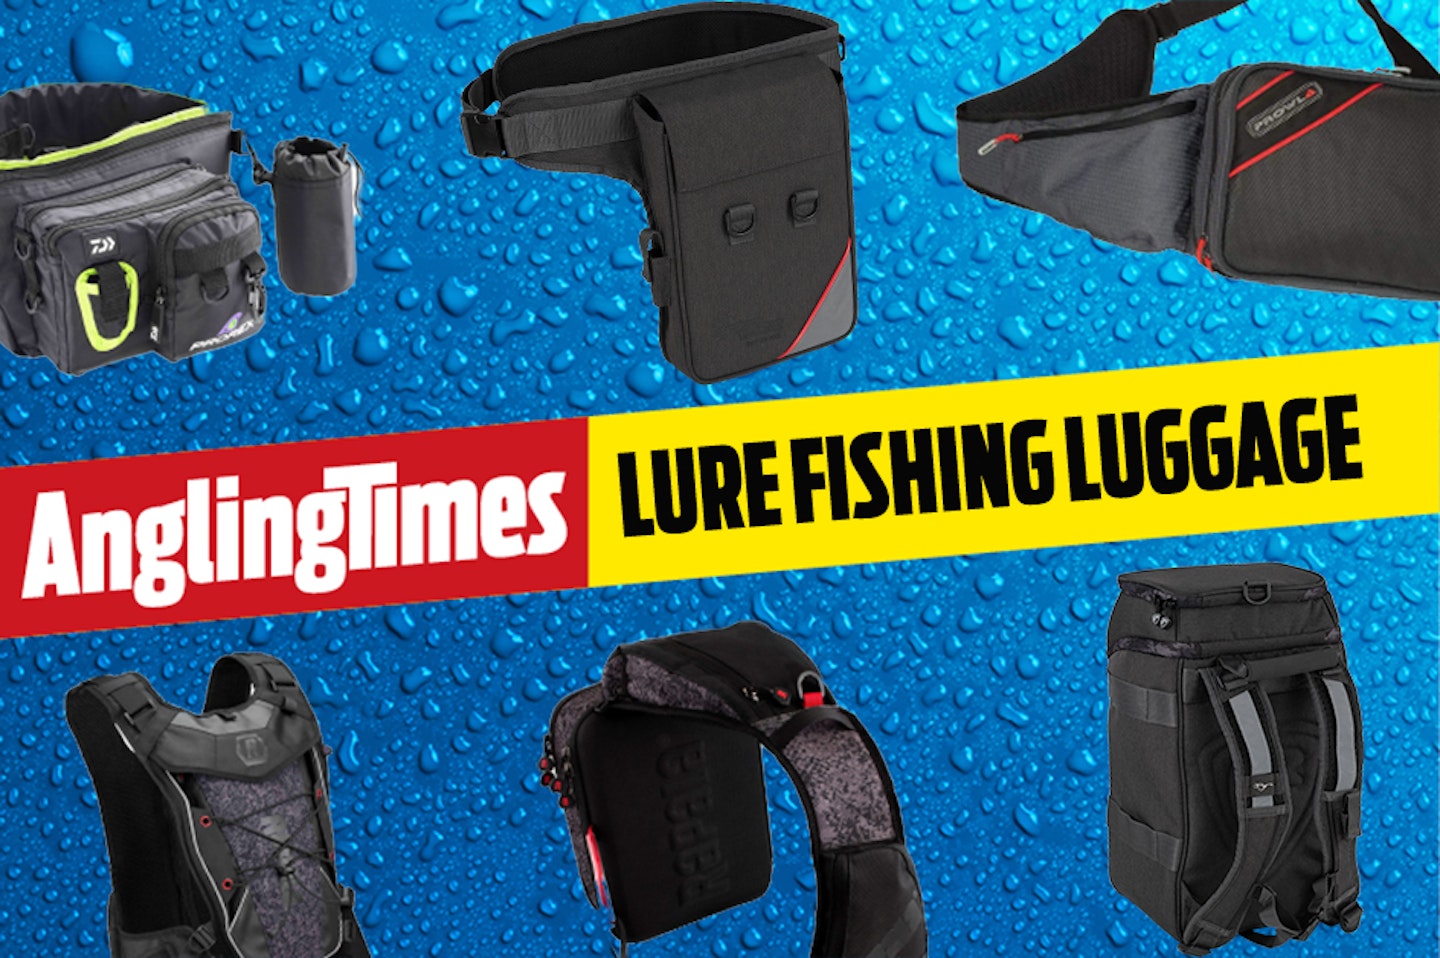 Best Luggage For Lure fishing